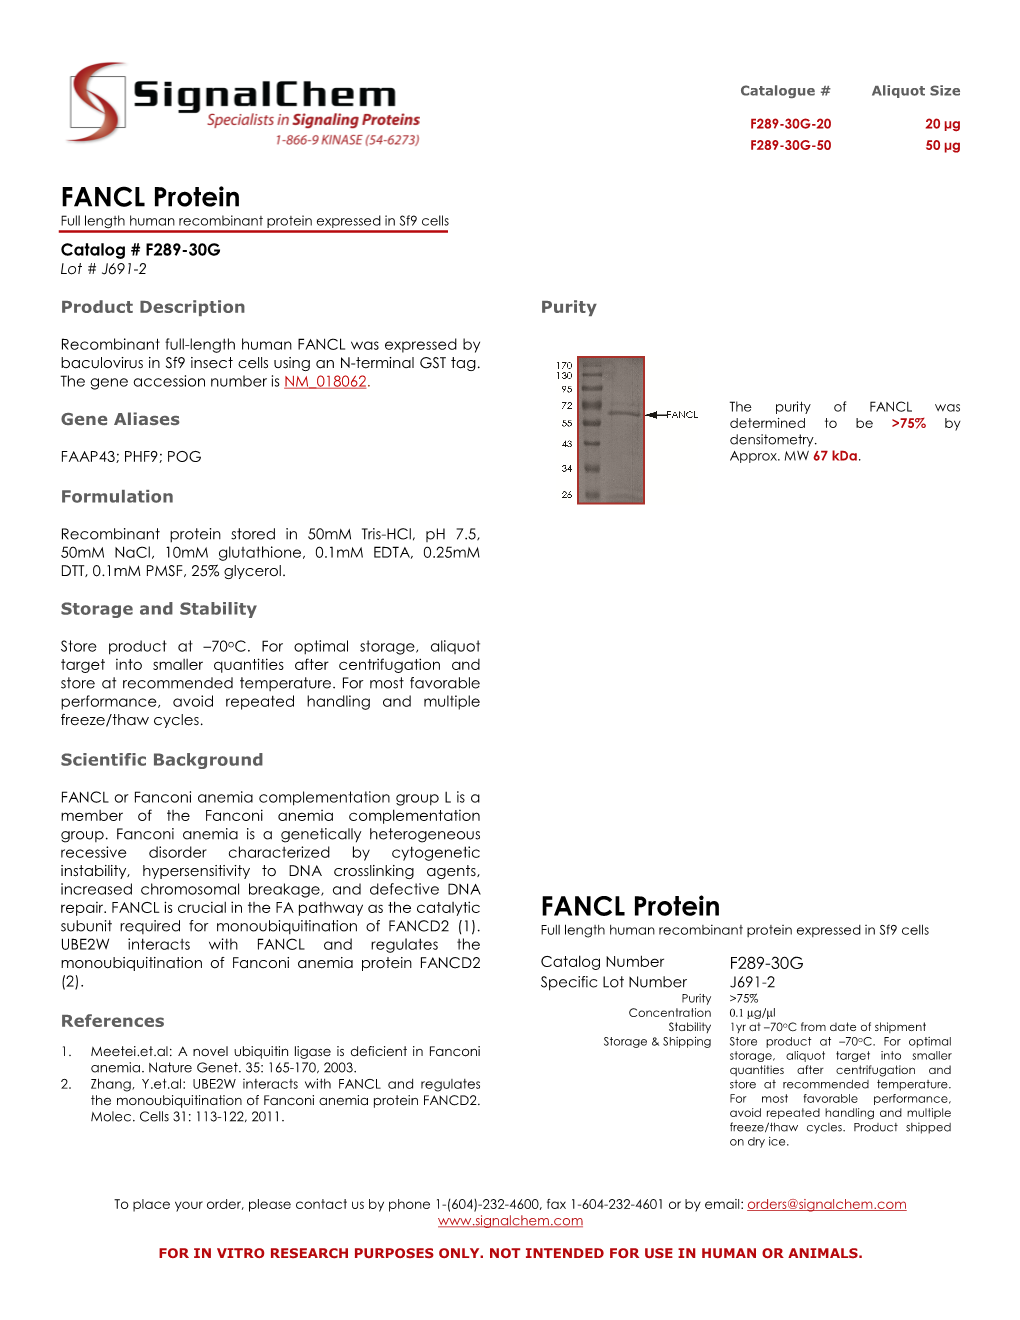 FANCL Protein FANCL Protein